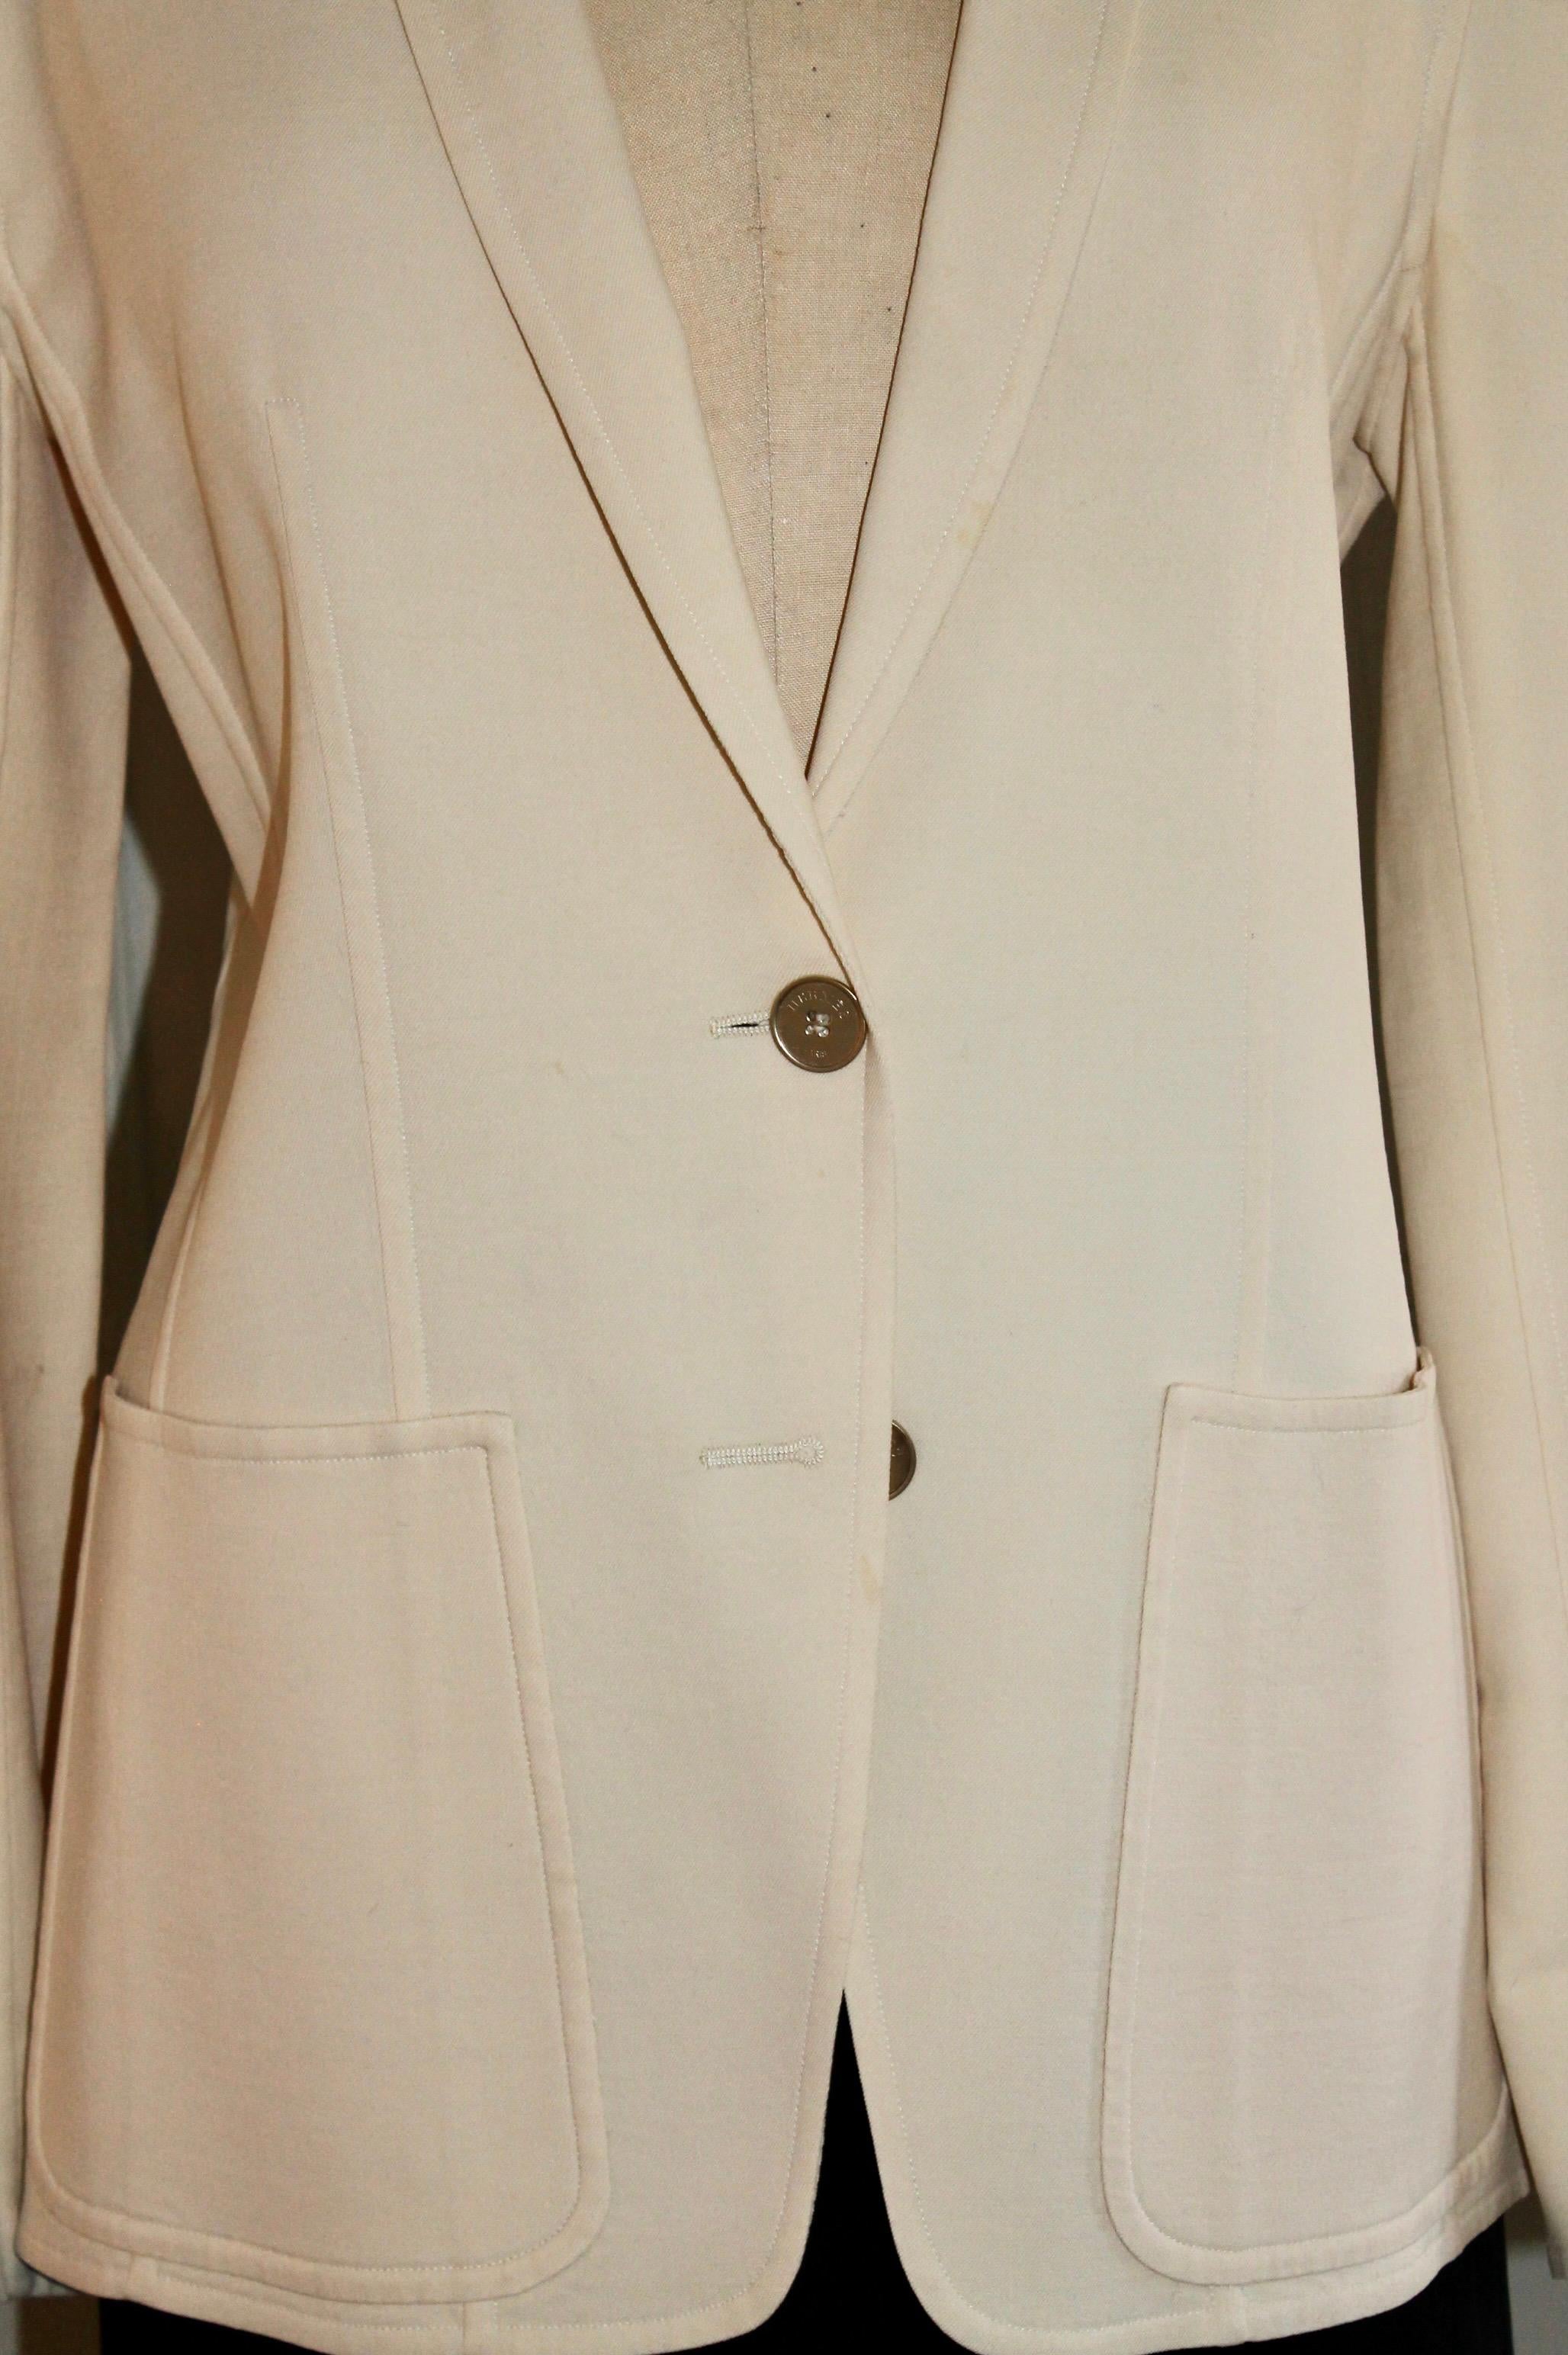 A classic Hermes cream white jacket, 96% wool and 4% lycra. EU size 44. 10 Hermes buttons.